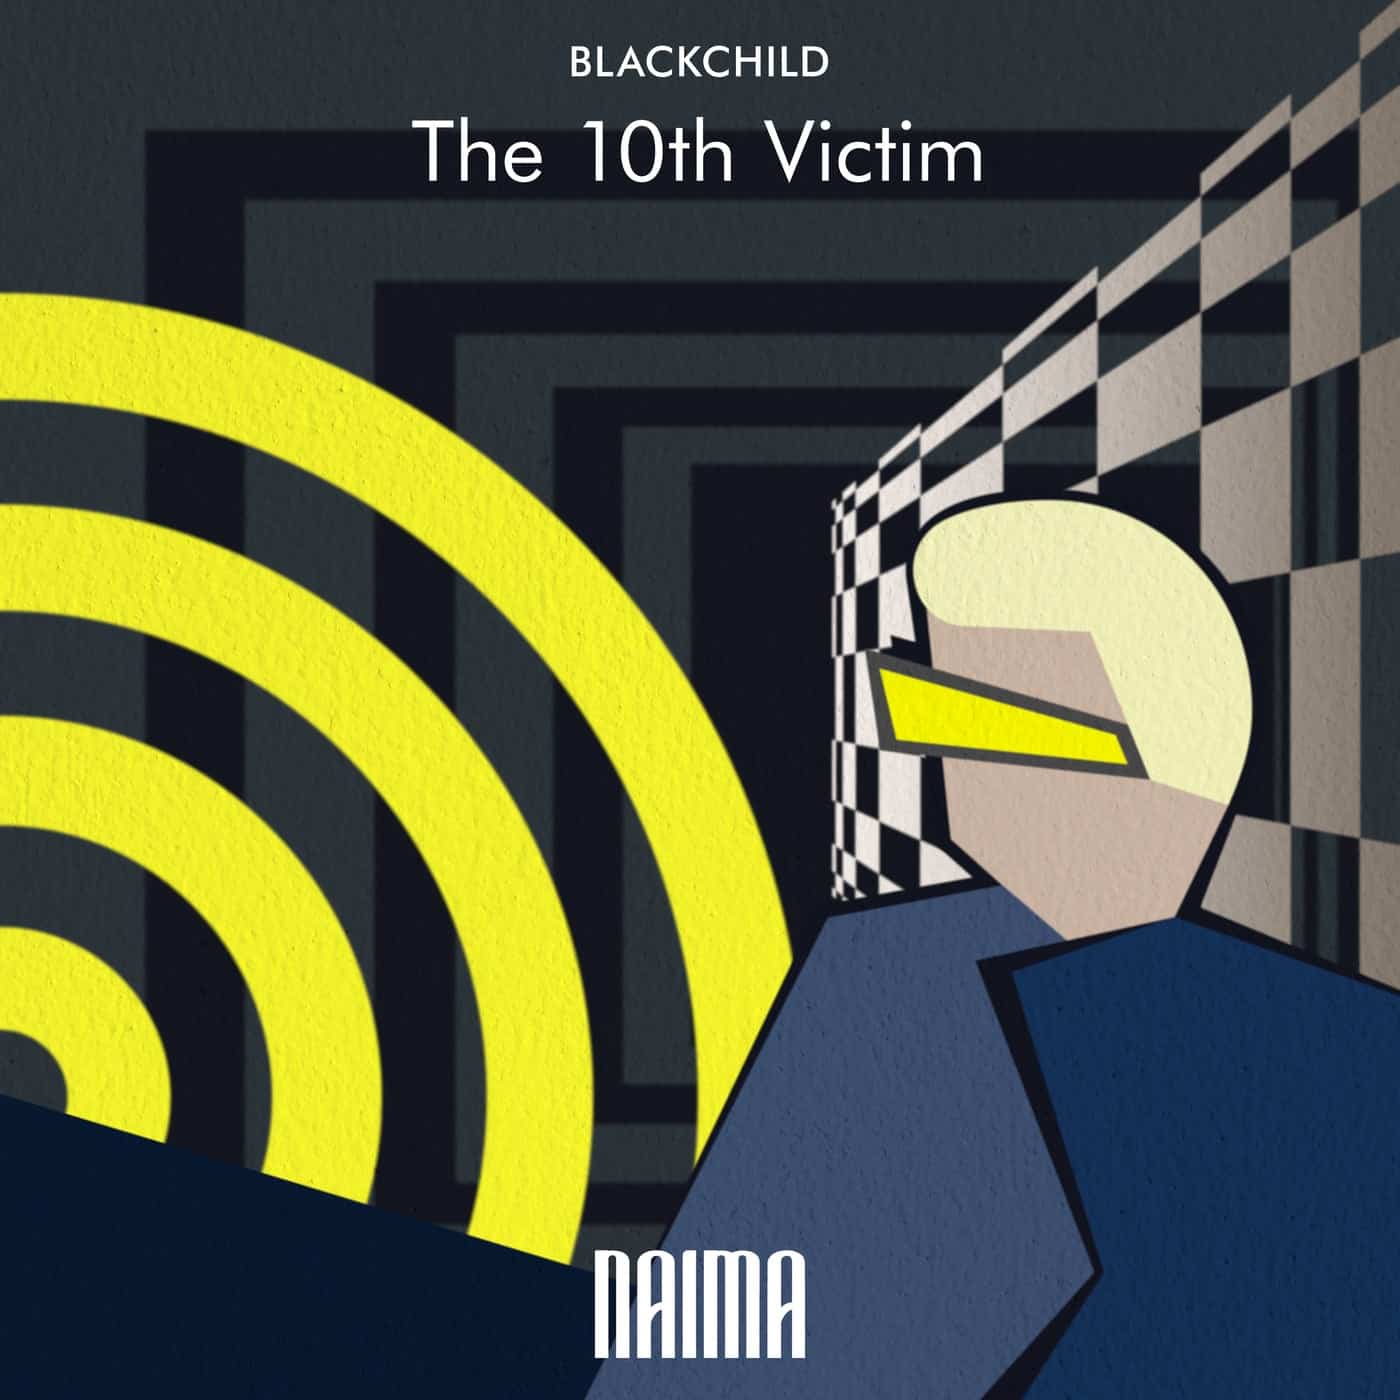 image cover: The 10th Victim by Blackchild (ITA) on NAIMA